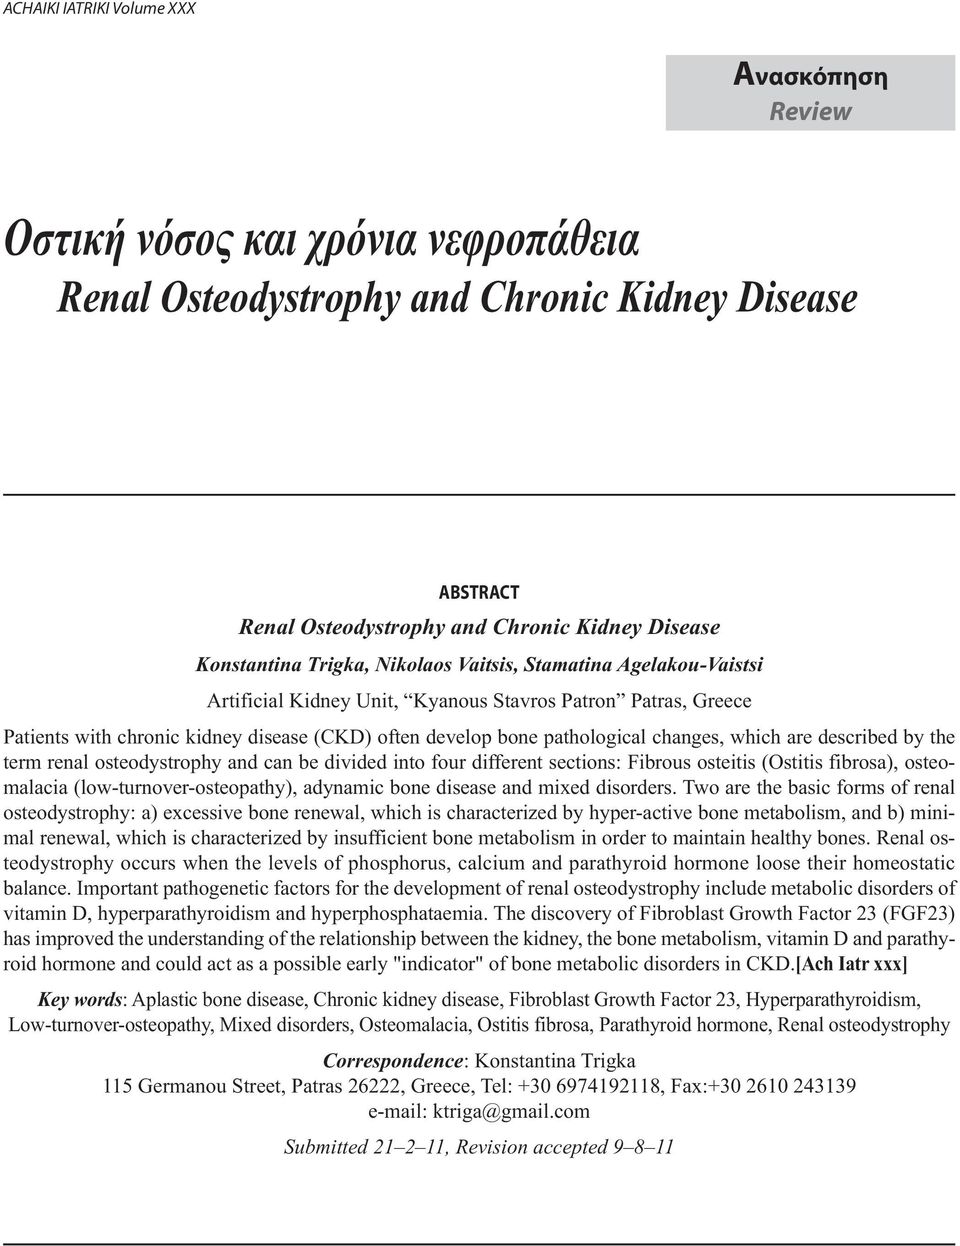 which are described by the term renal osteodystrophy and can be divided into four different sections: Fibrous osteitis (Ostitis fibrosa), osteomalacia (low-turnover-osteopathy), adynamic bone disease